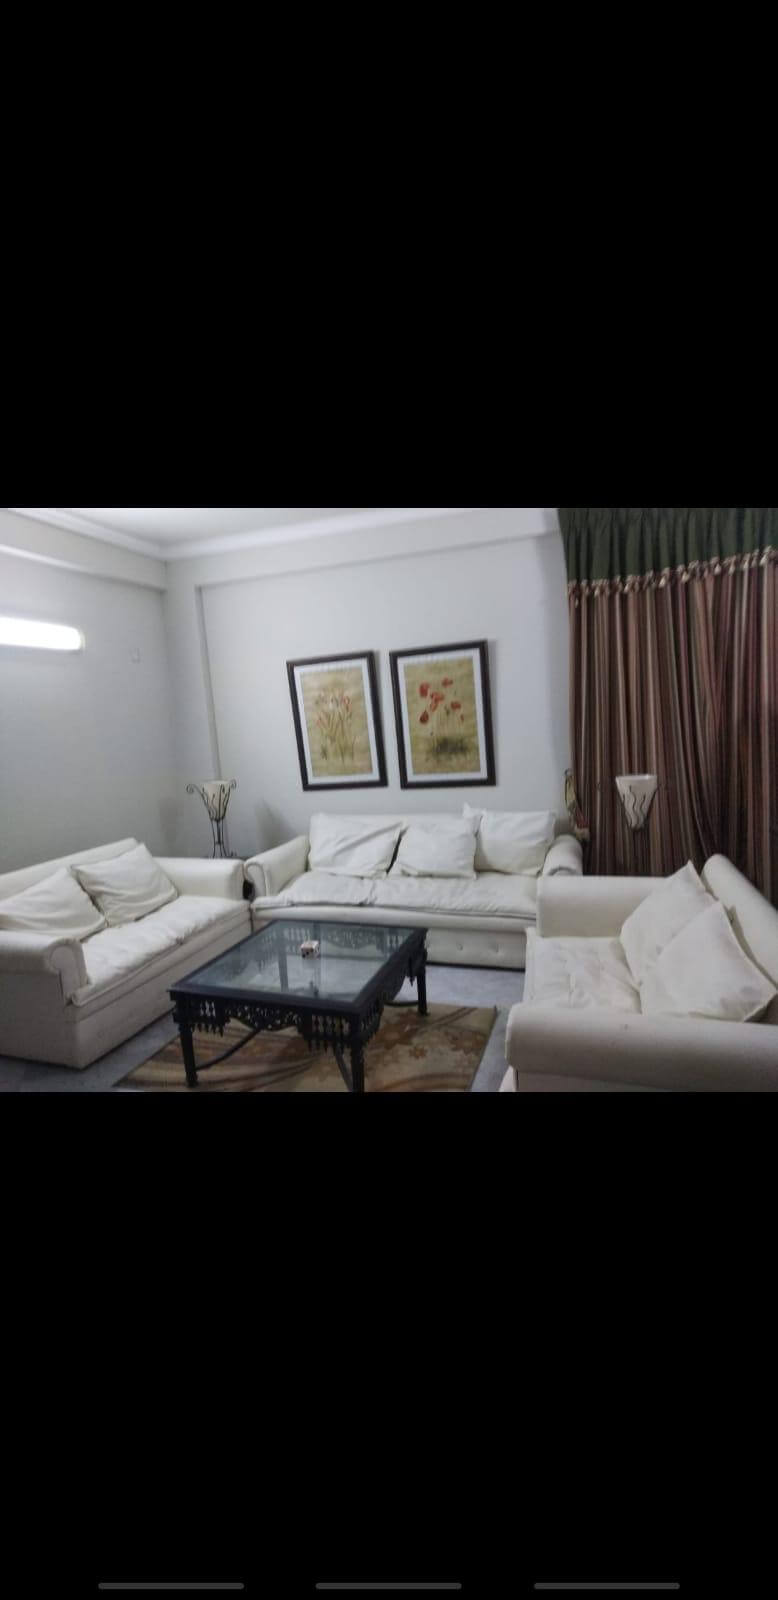 1 Bed Apartment Fully furnished For Rent Barakahu Islamabad,